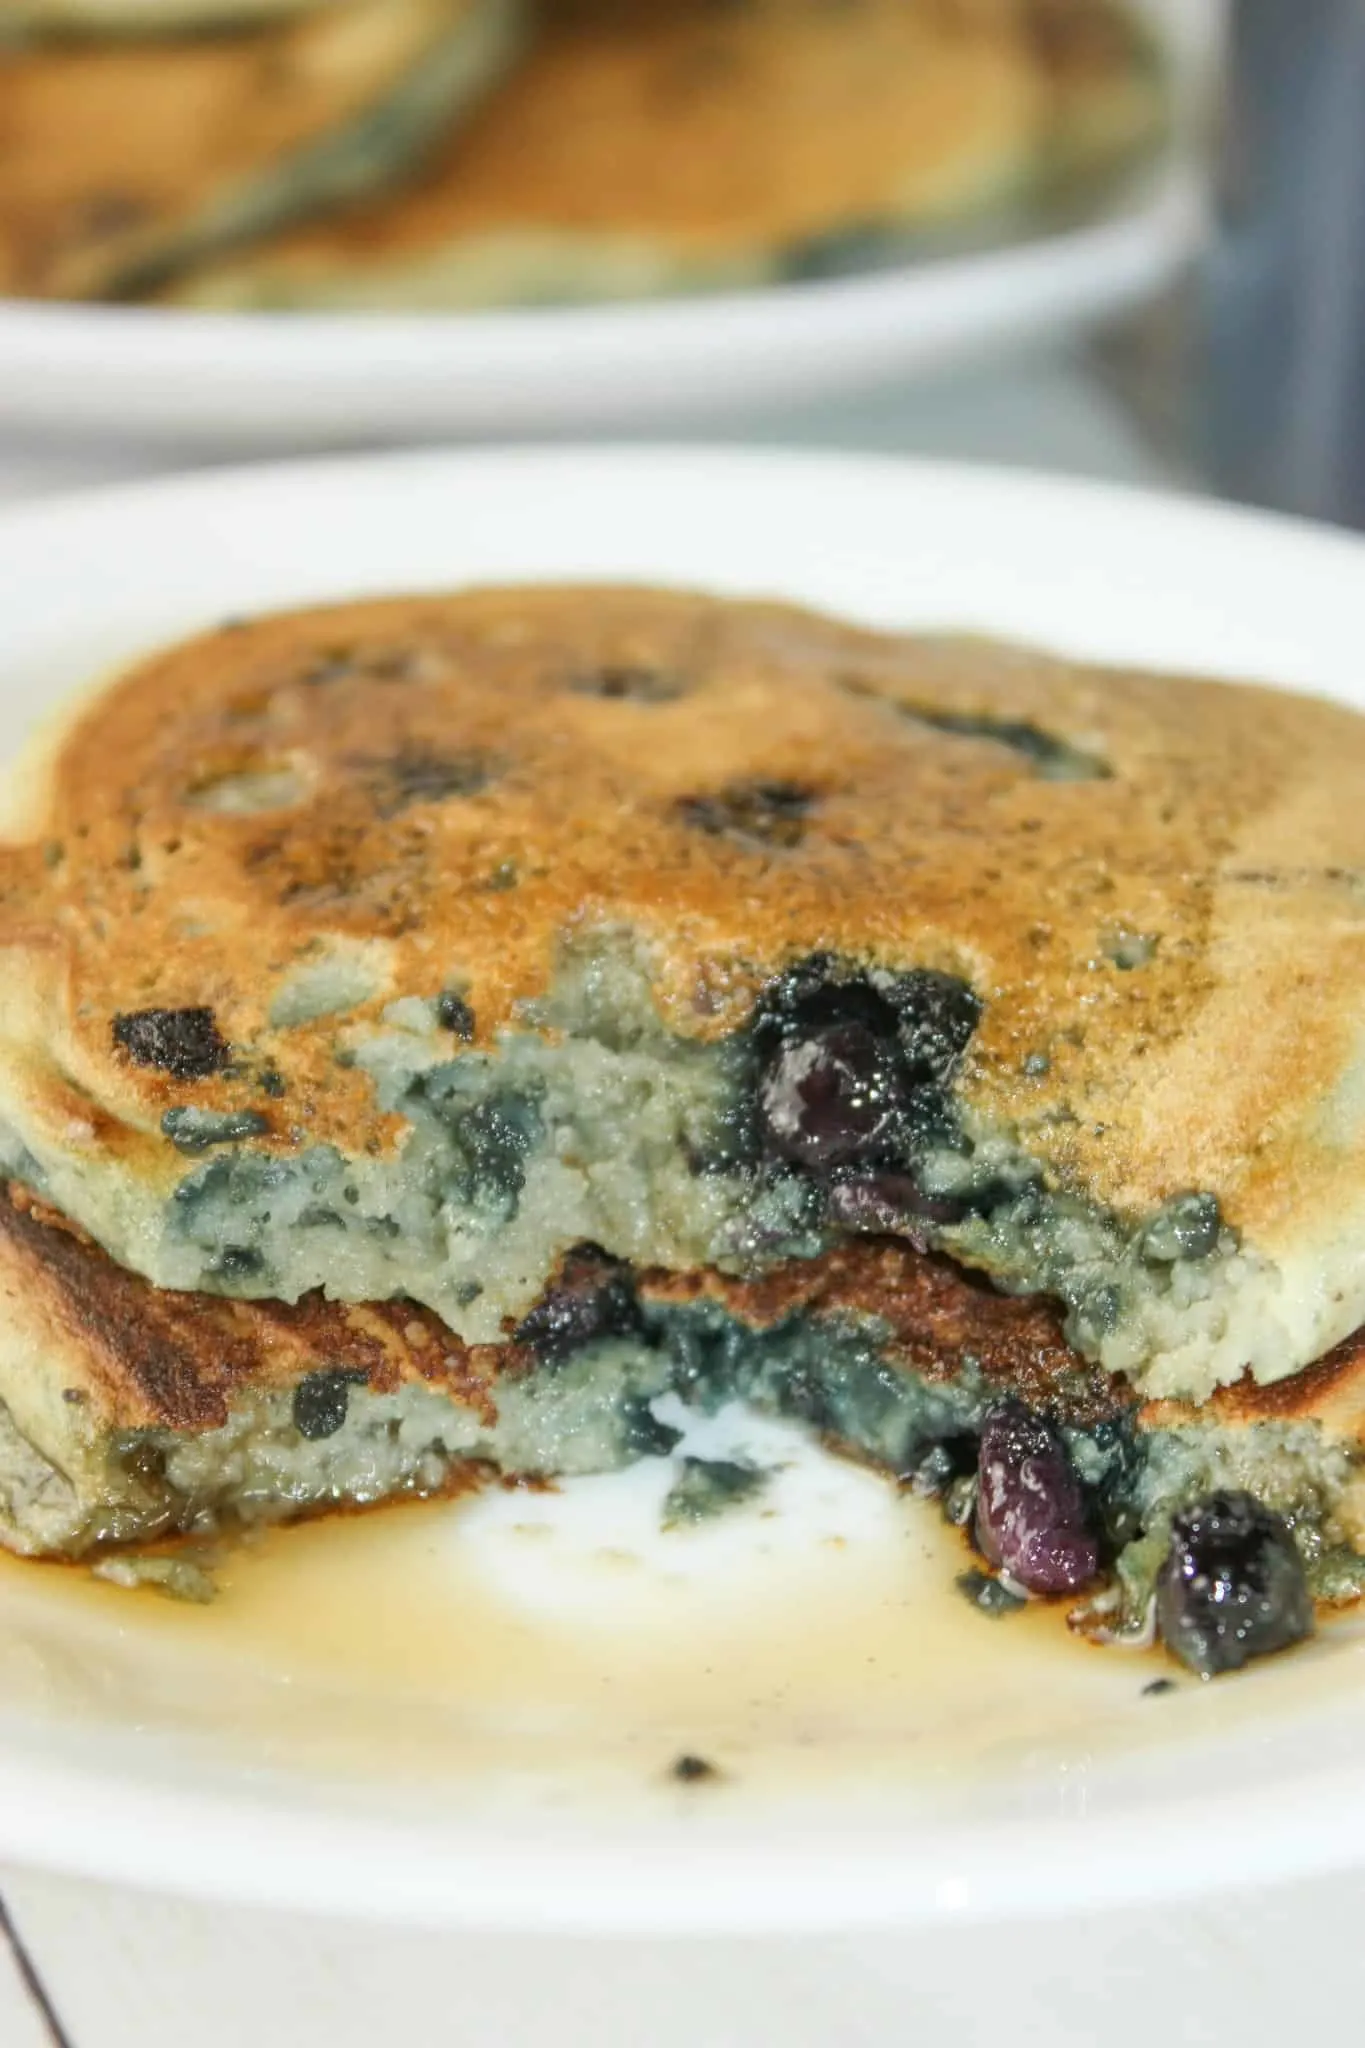 Gluten Free Blueberry Pancakes are a nice, light and fluffy breakfast choice.  Freeze any left overs for a quick reheat in the toaster.